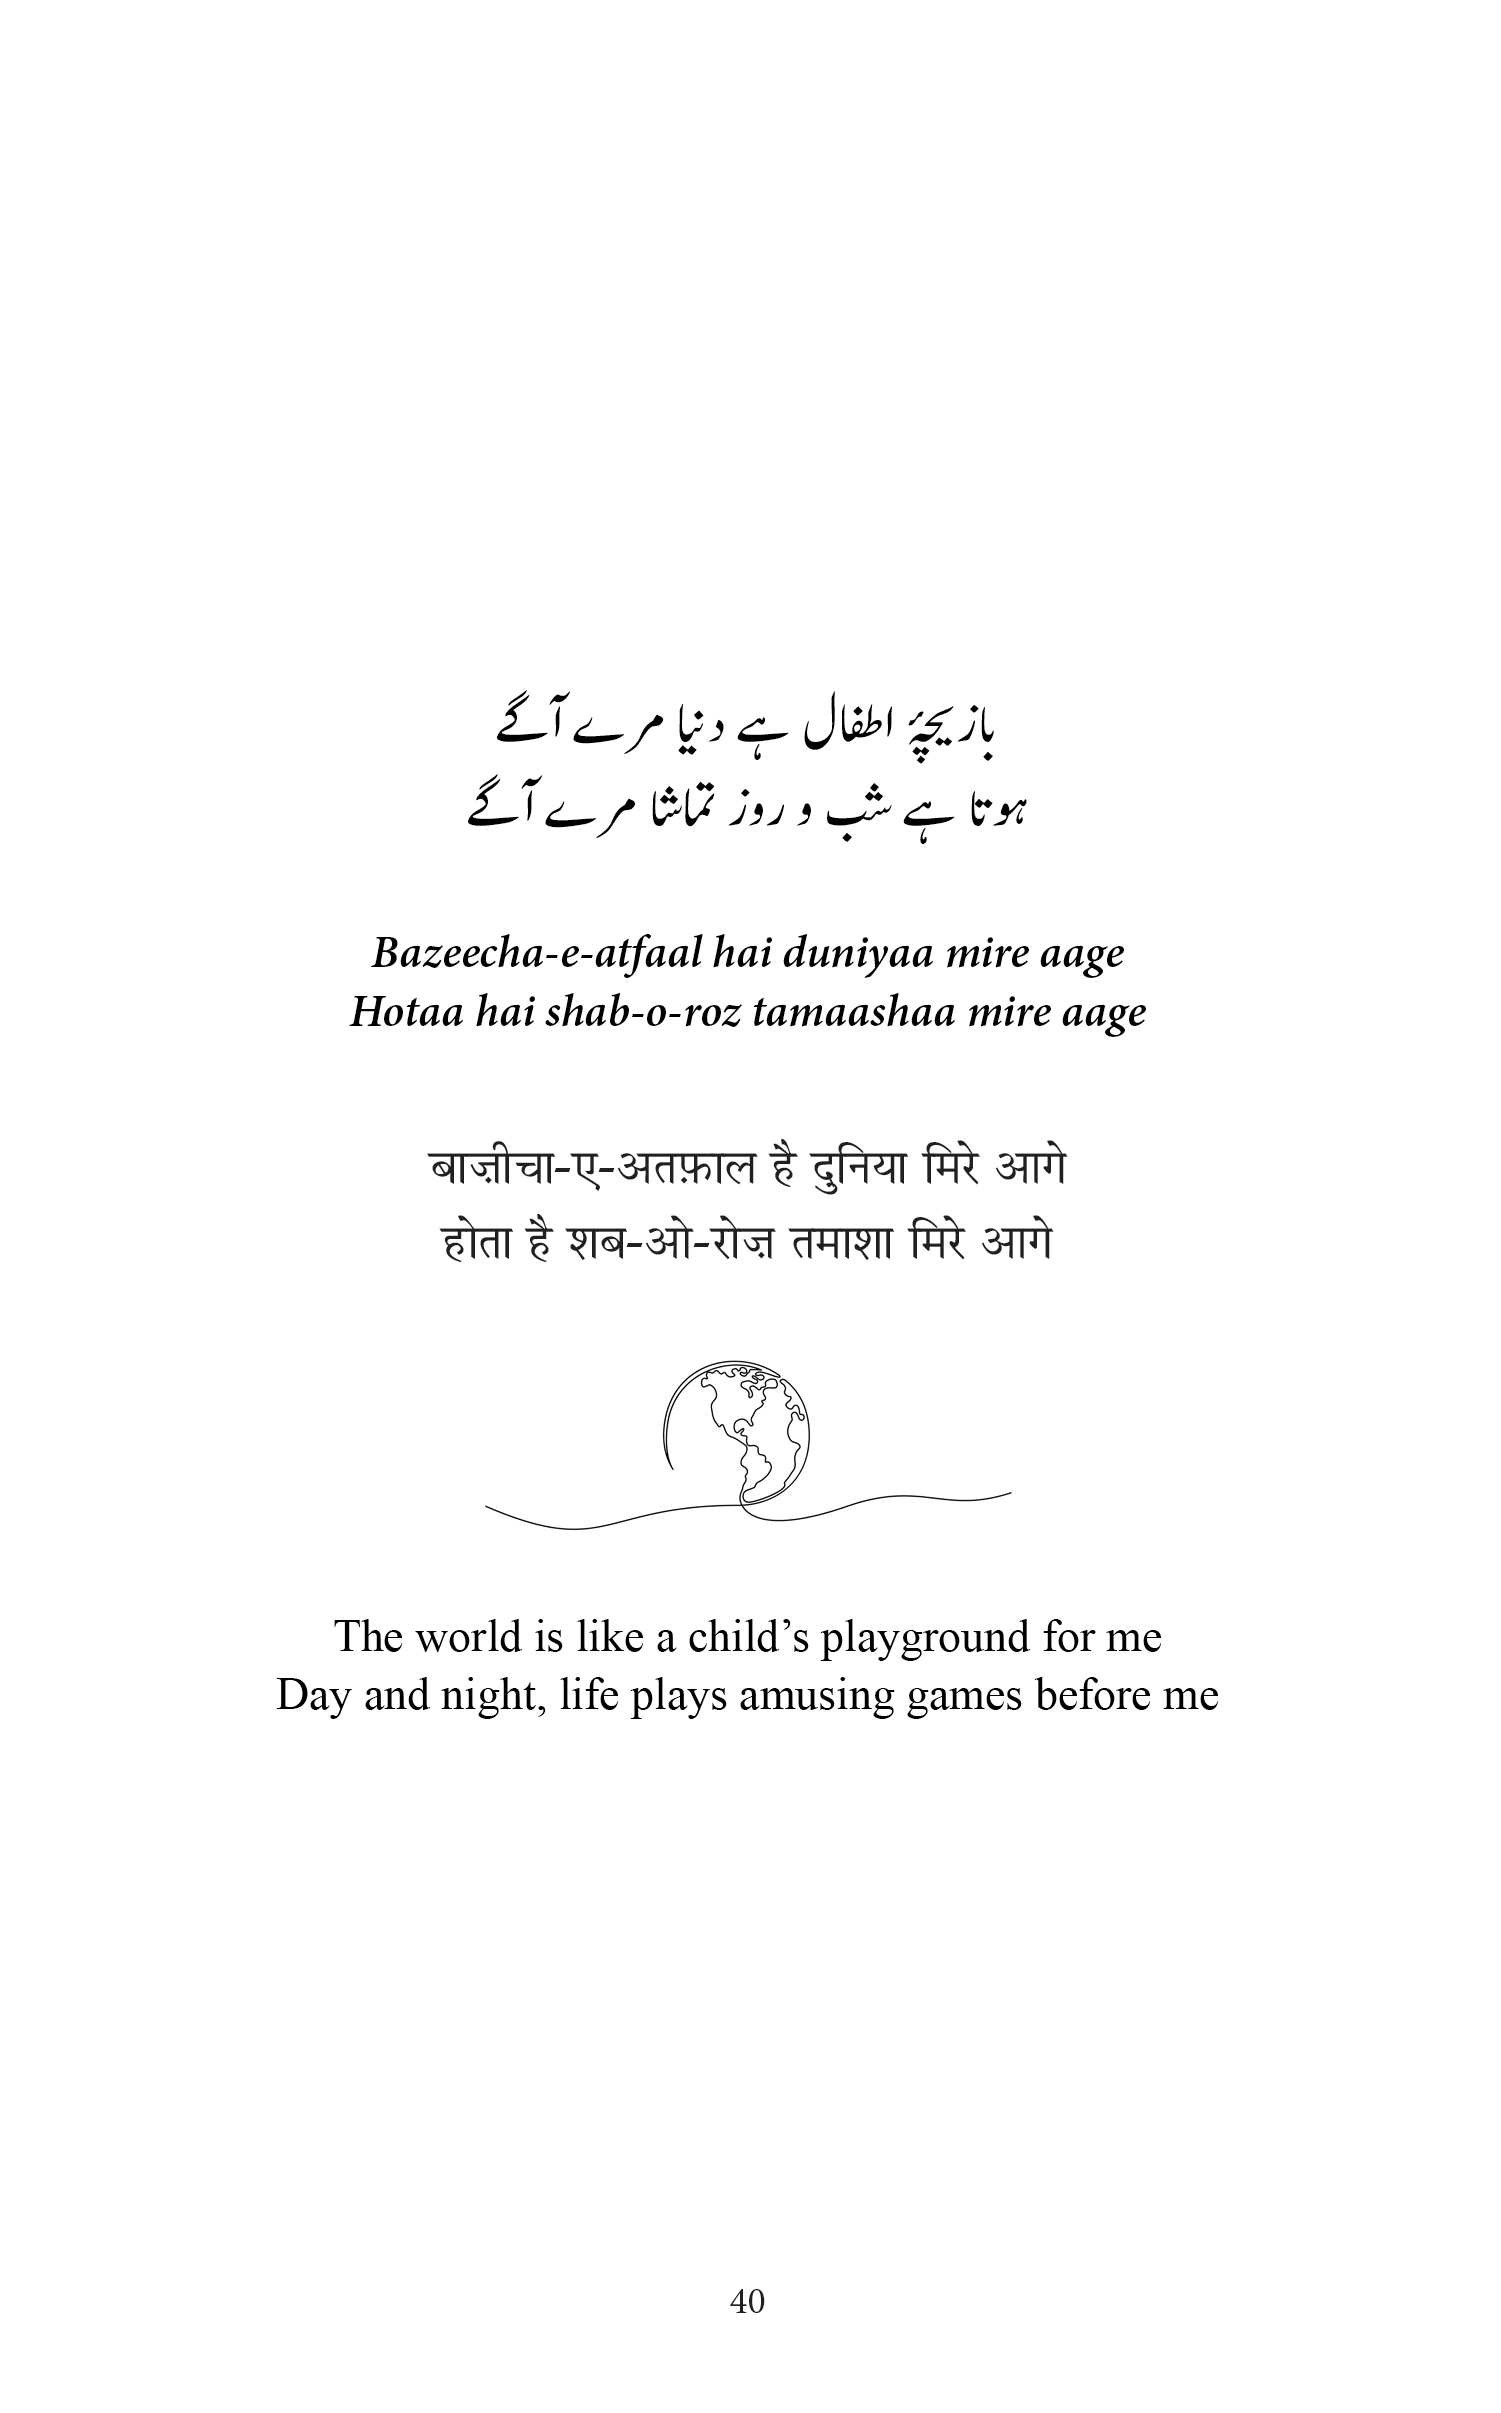 The Eloquence of Ghalib